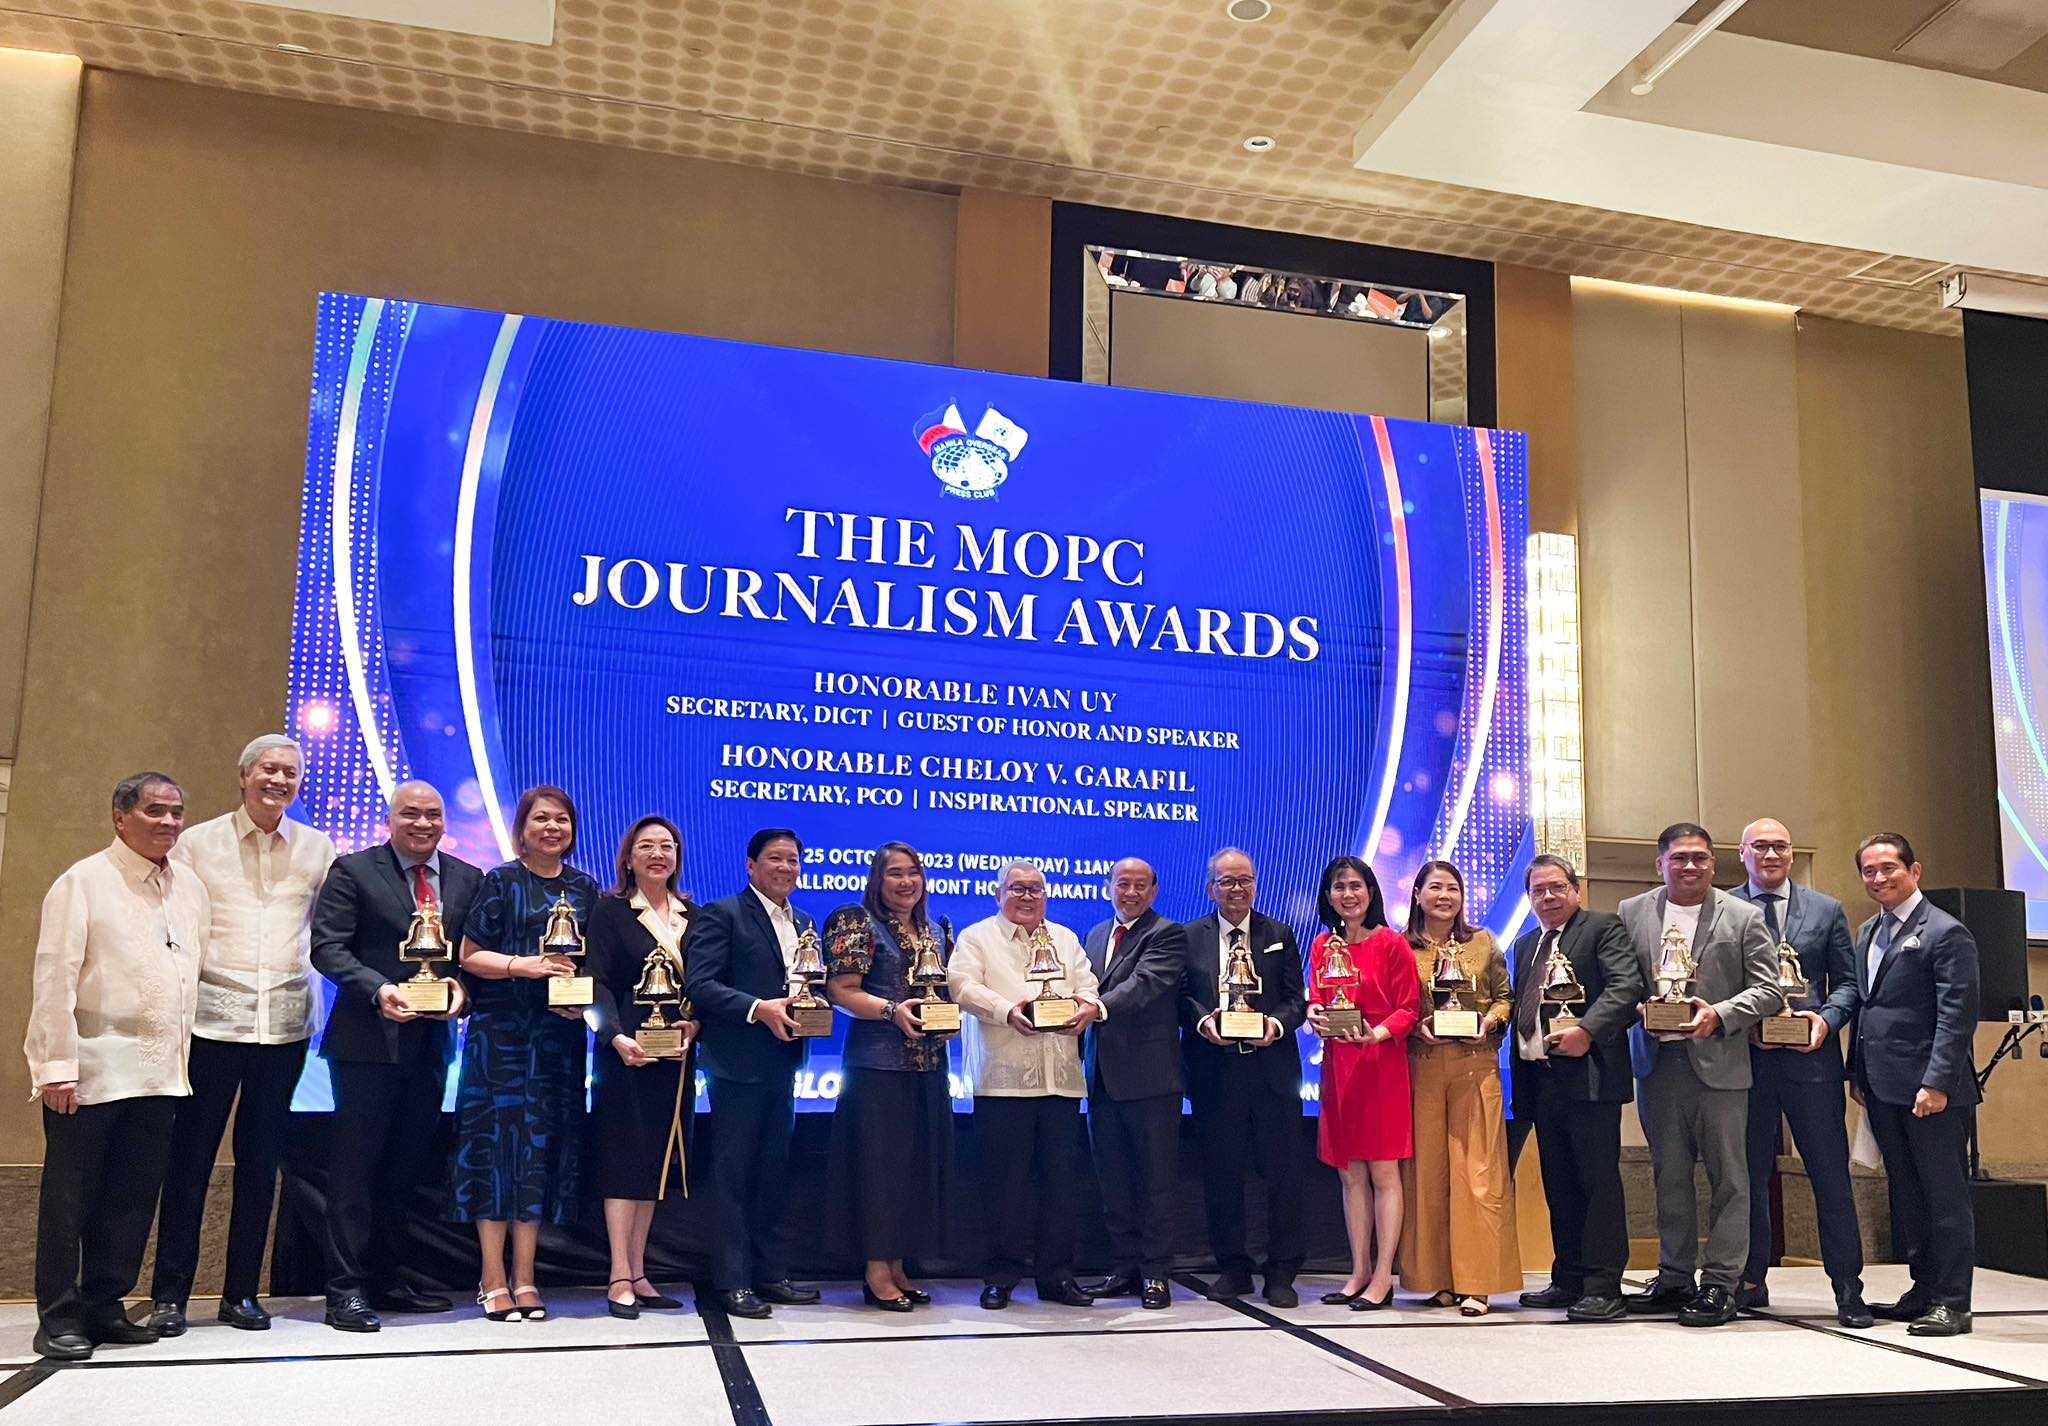 DZRH wins Radio Station of the Year; Deo Macalma bags Radio Broadcaster of the Year at MOPC Journalism Awards